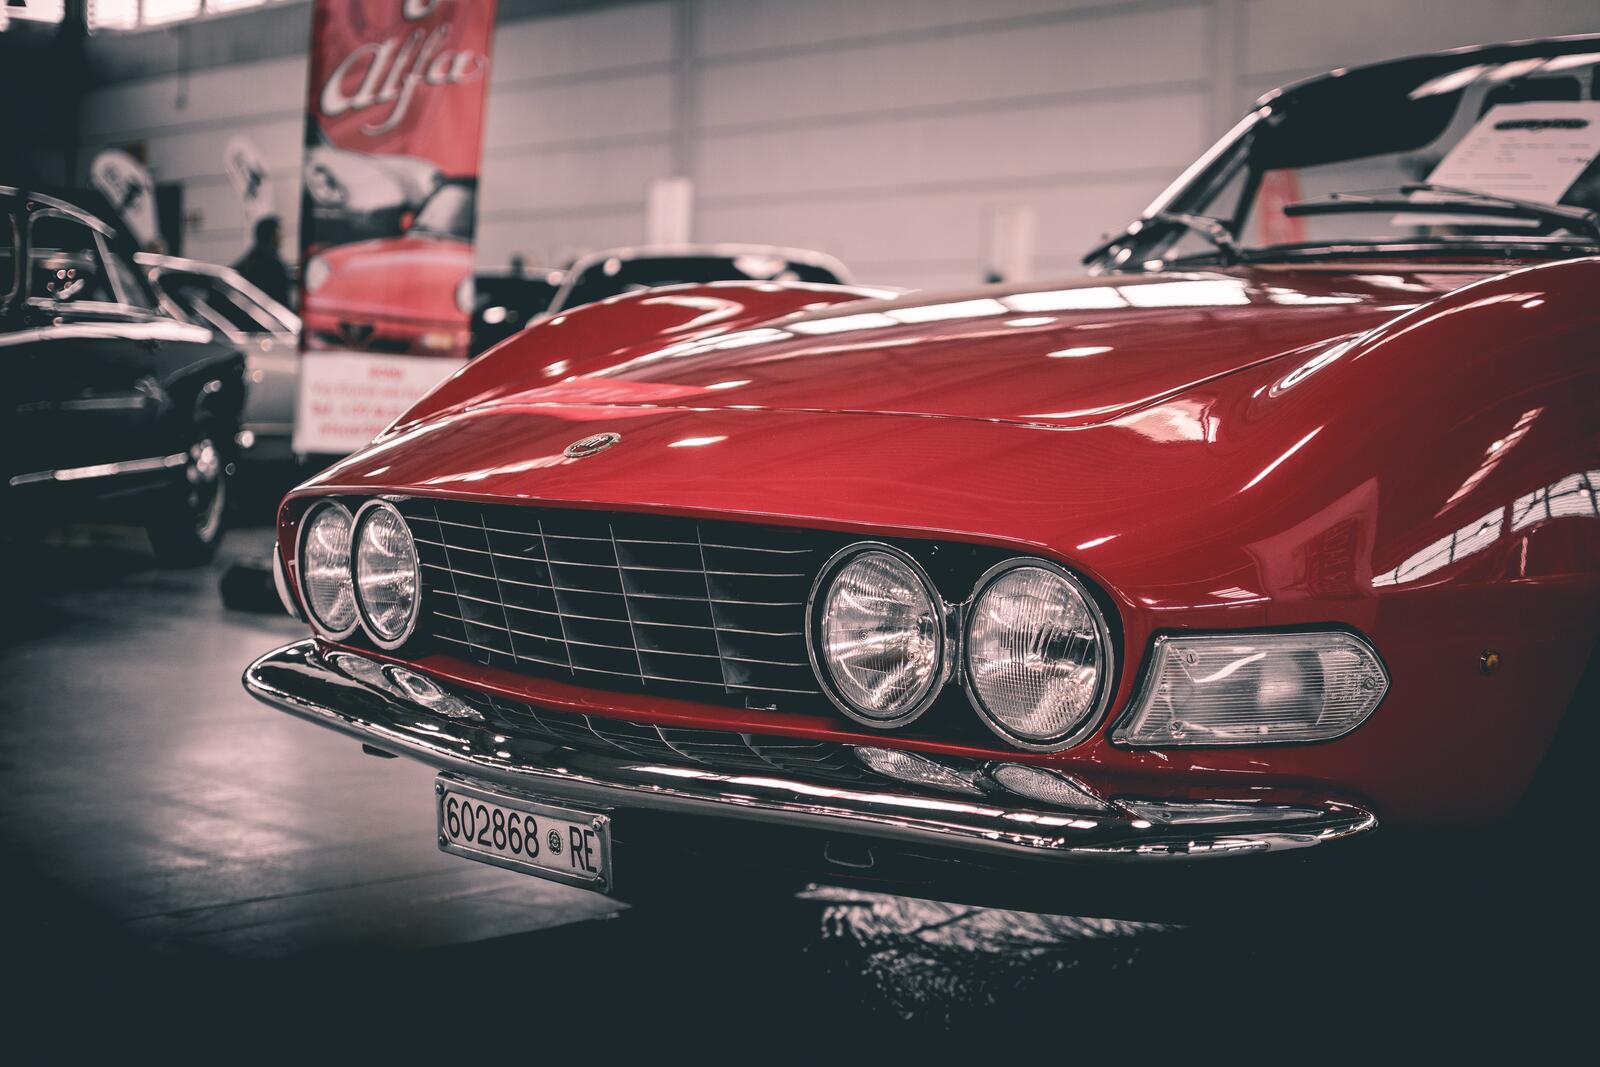 Wallpapers wallpaper retro red car front of on the desktop